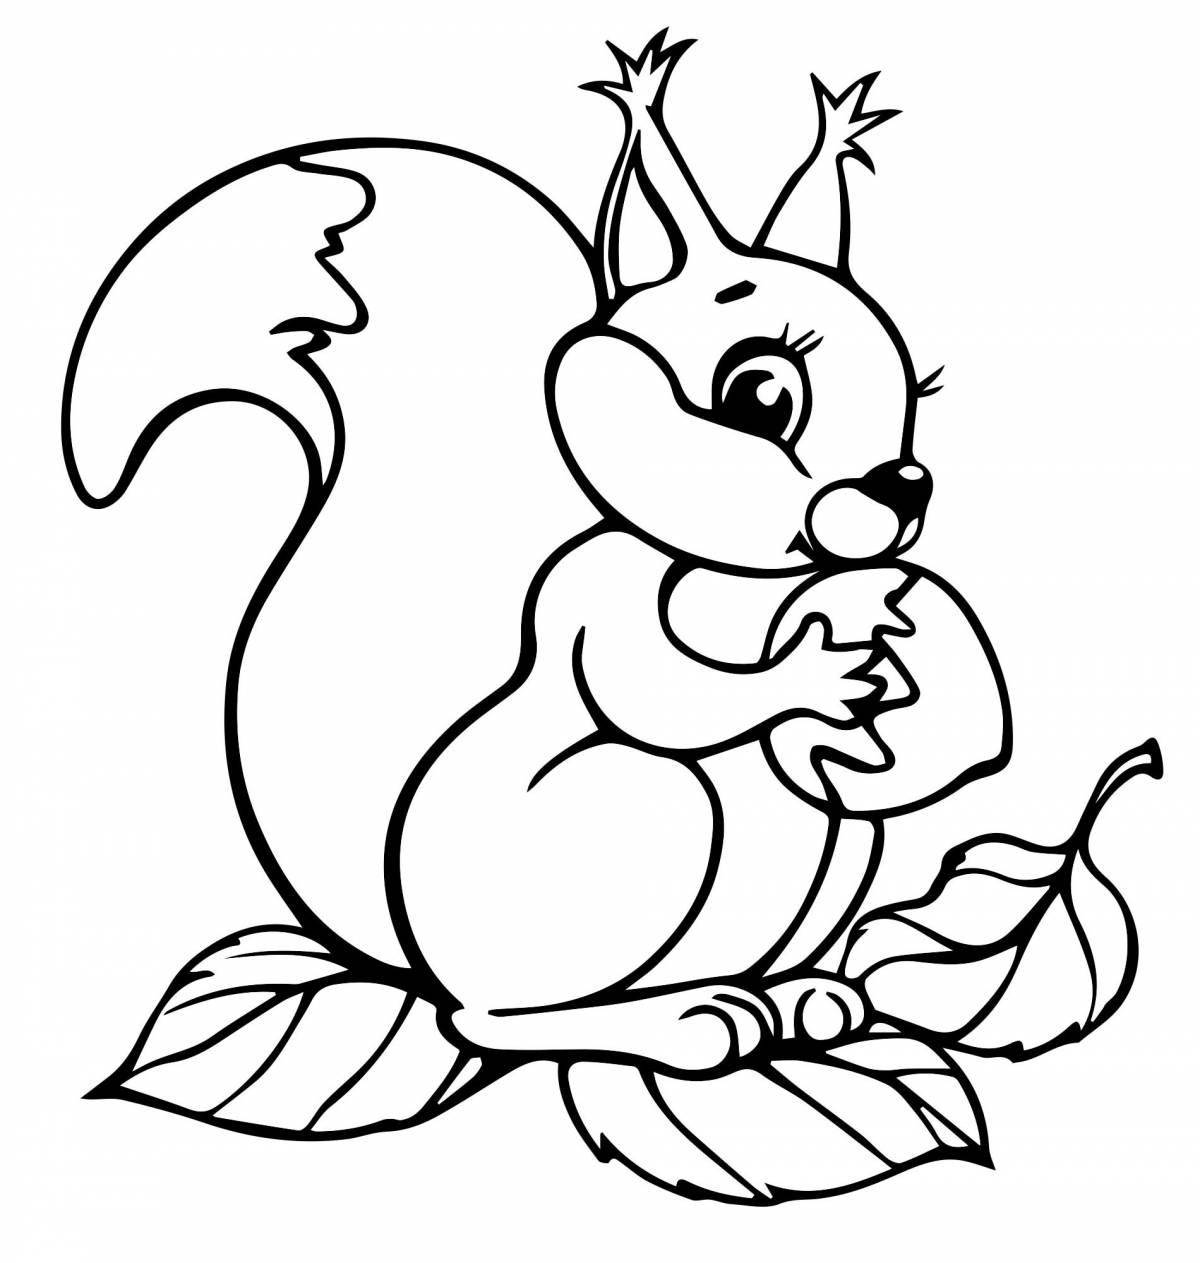 Peaceful drawing of a squirrel